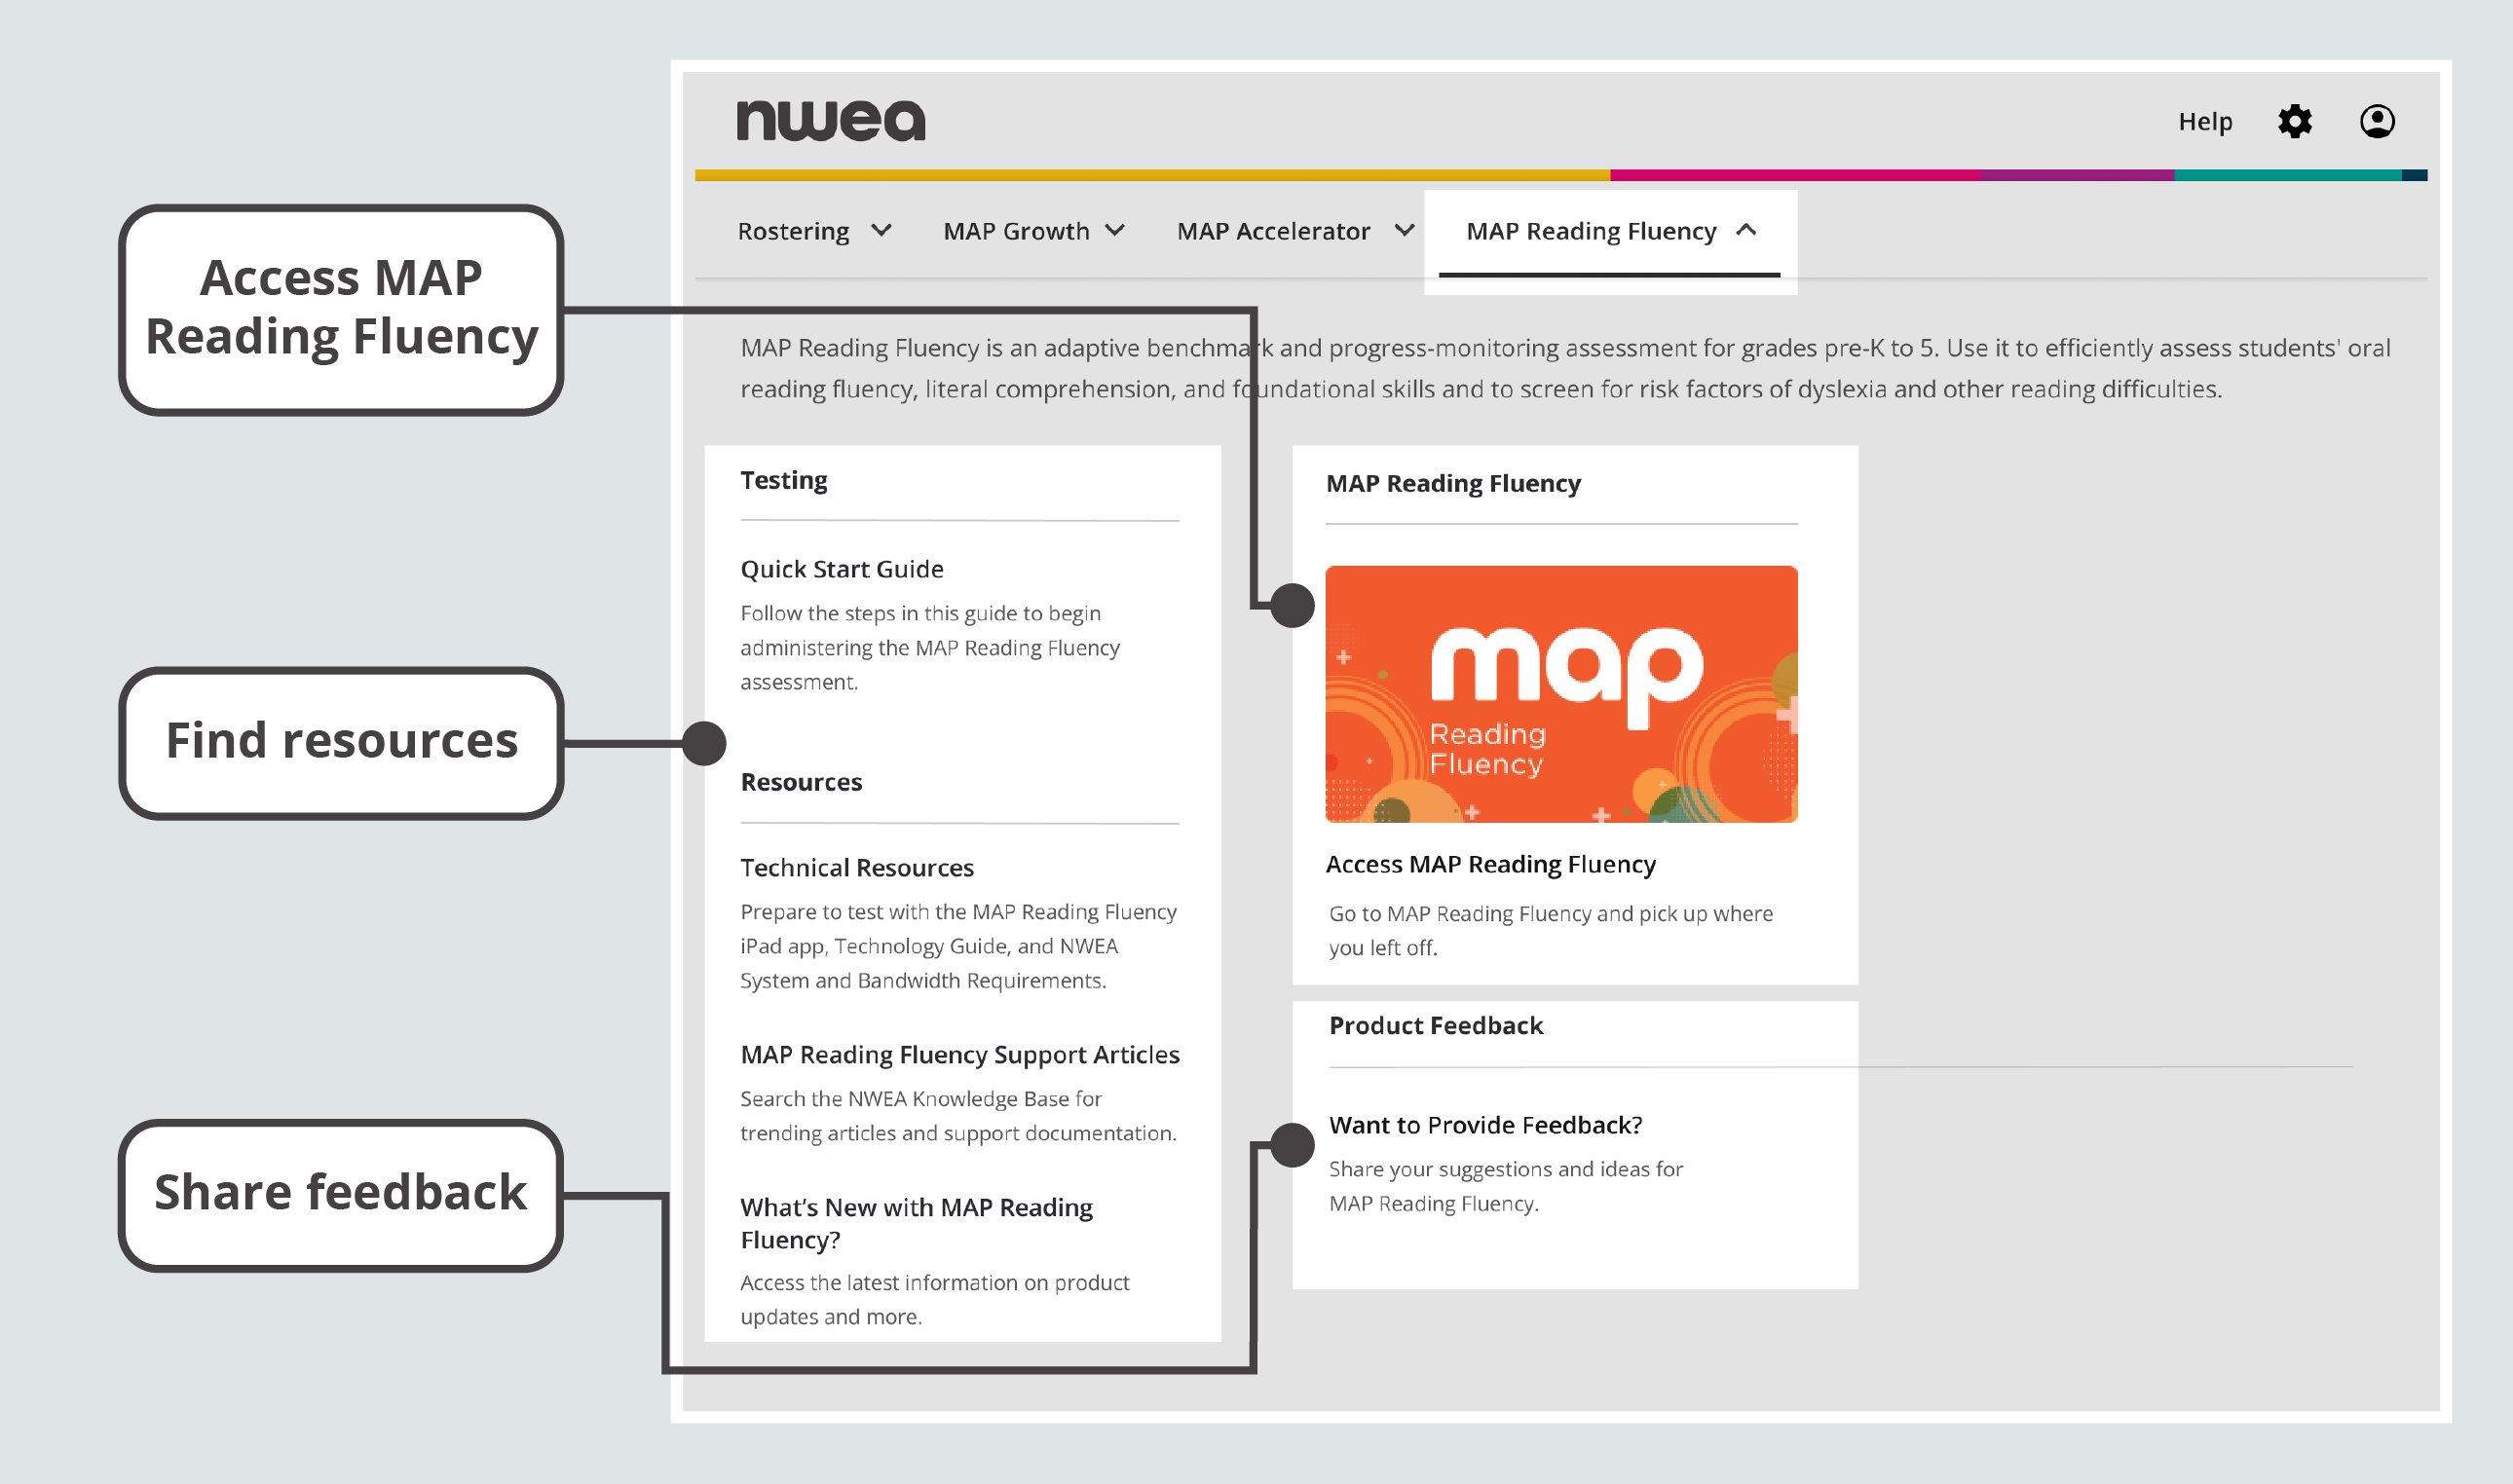 You’ll be able to access MAP Reading Fluency, find resources, and share feedback.